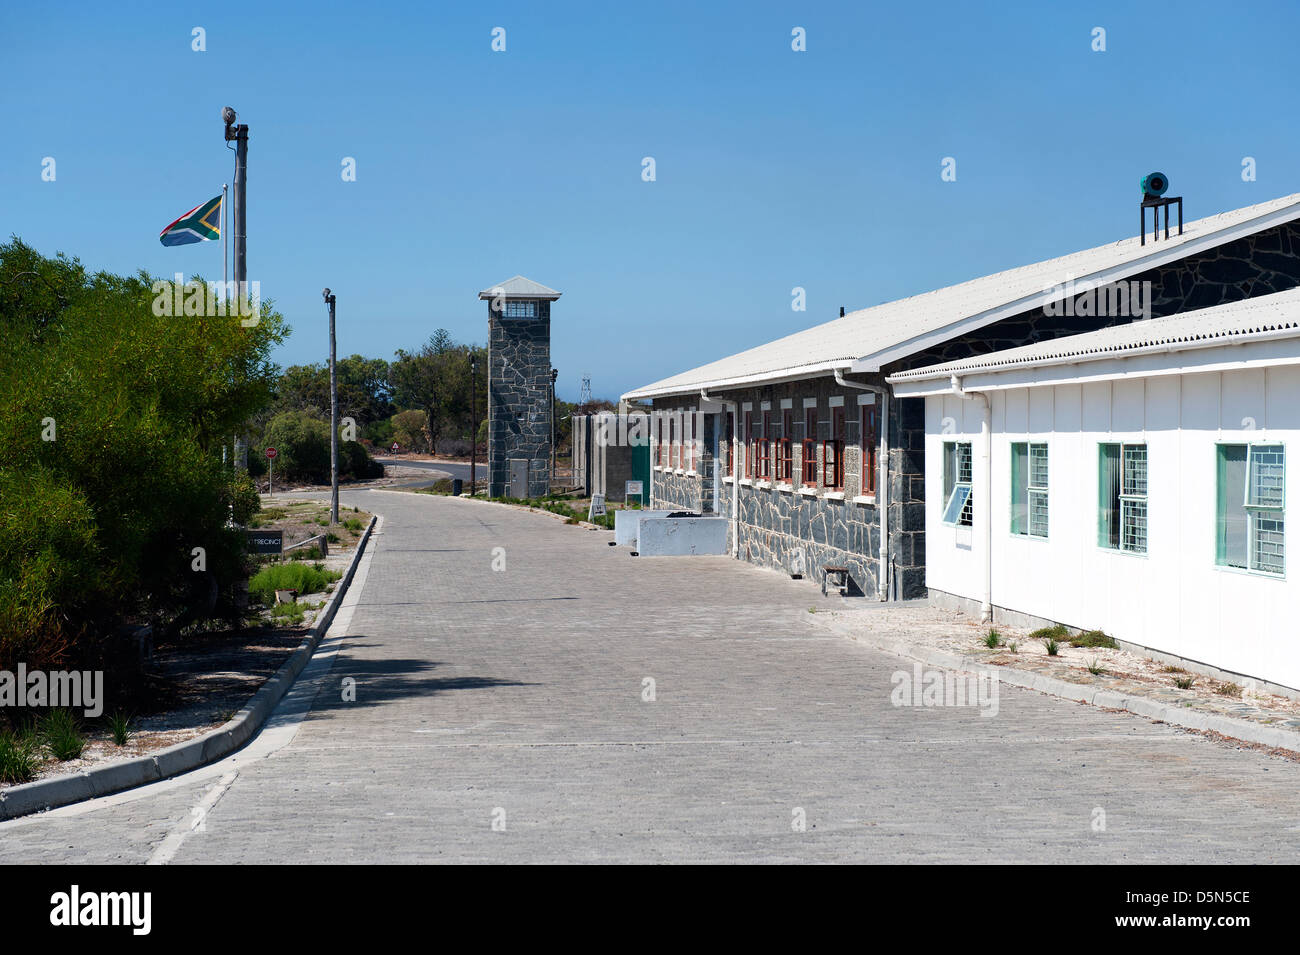 Robben Island prison off the coast of Cape Town, South Africa Stock Photo